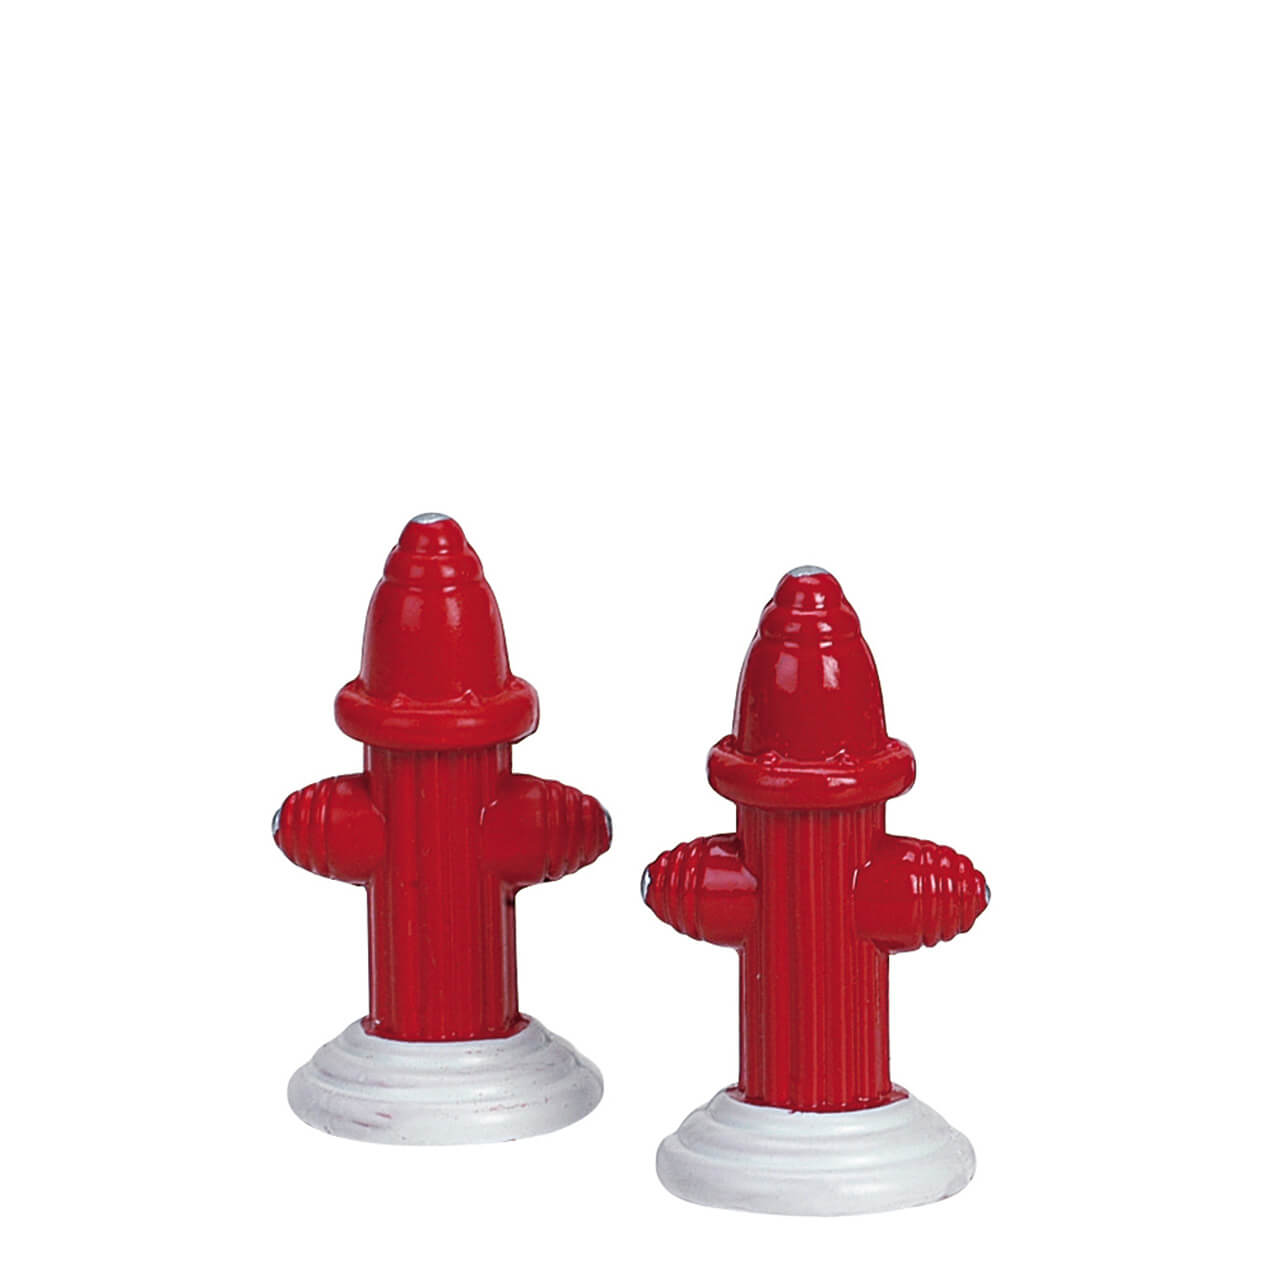 Metal Fire Hydrant, Set of 2